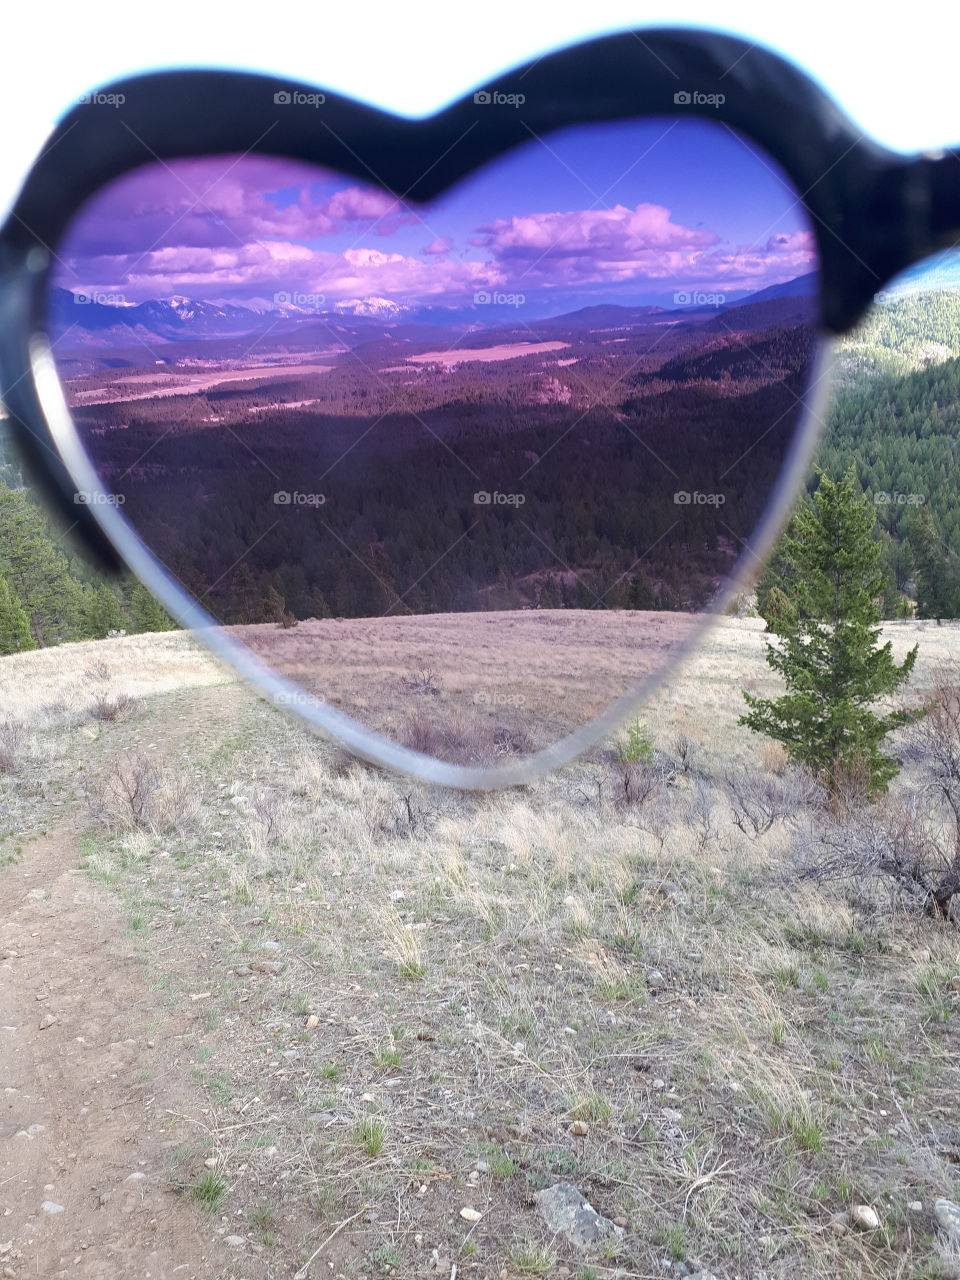 sometimes you just need to take a look through some rose tinted glasses and get a new perspective